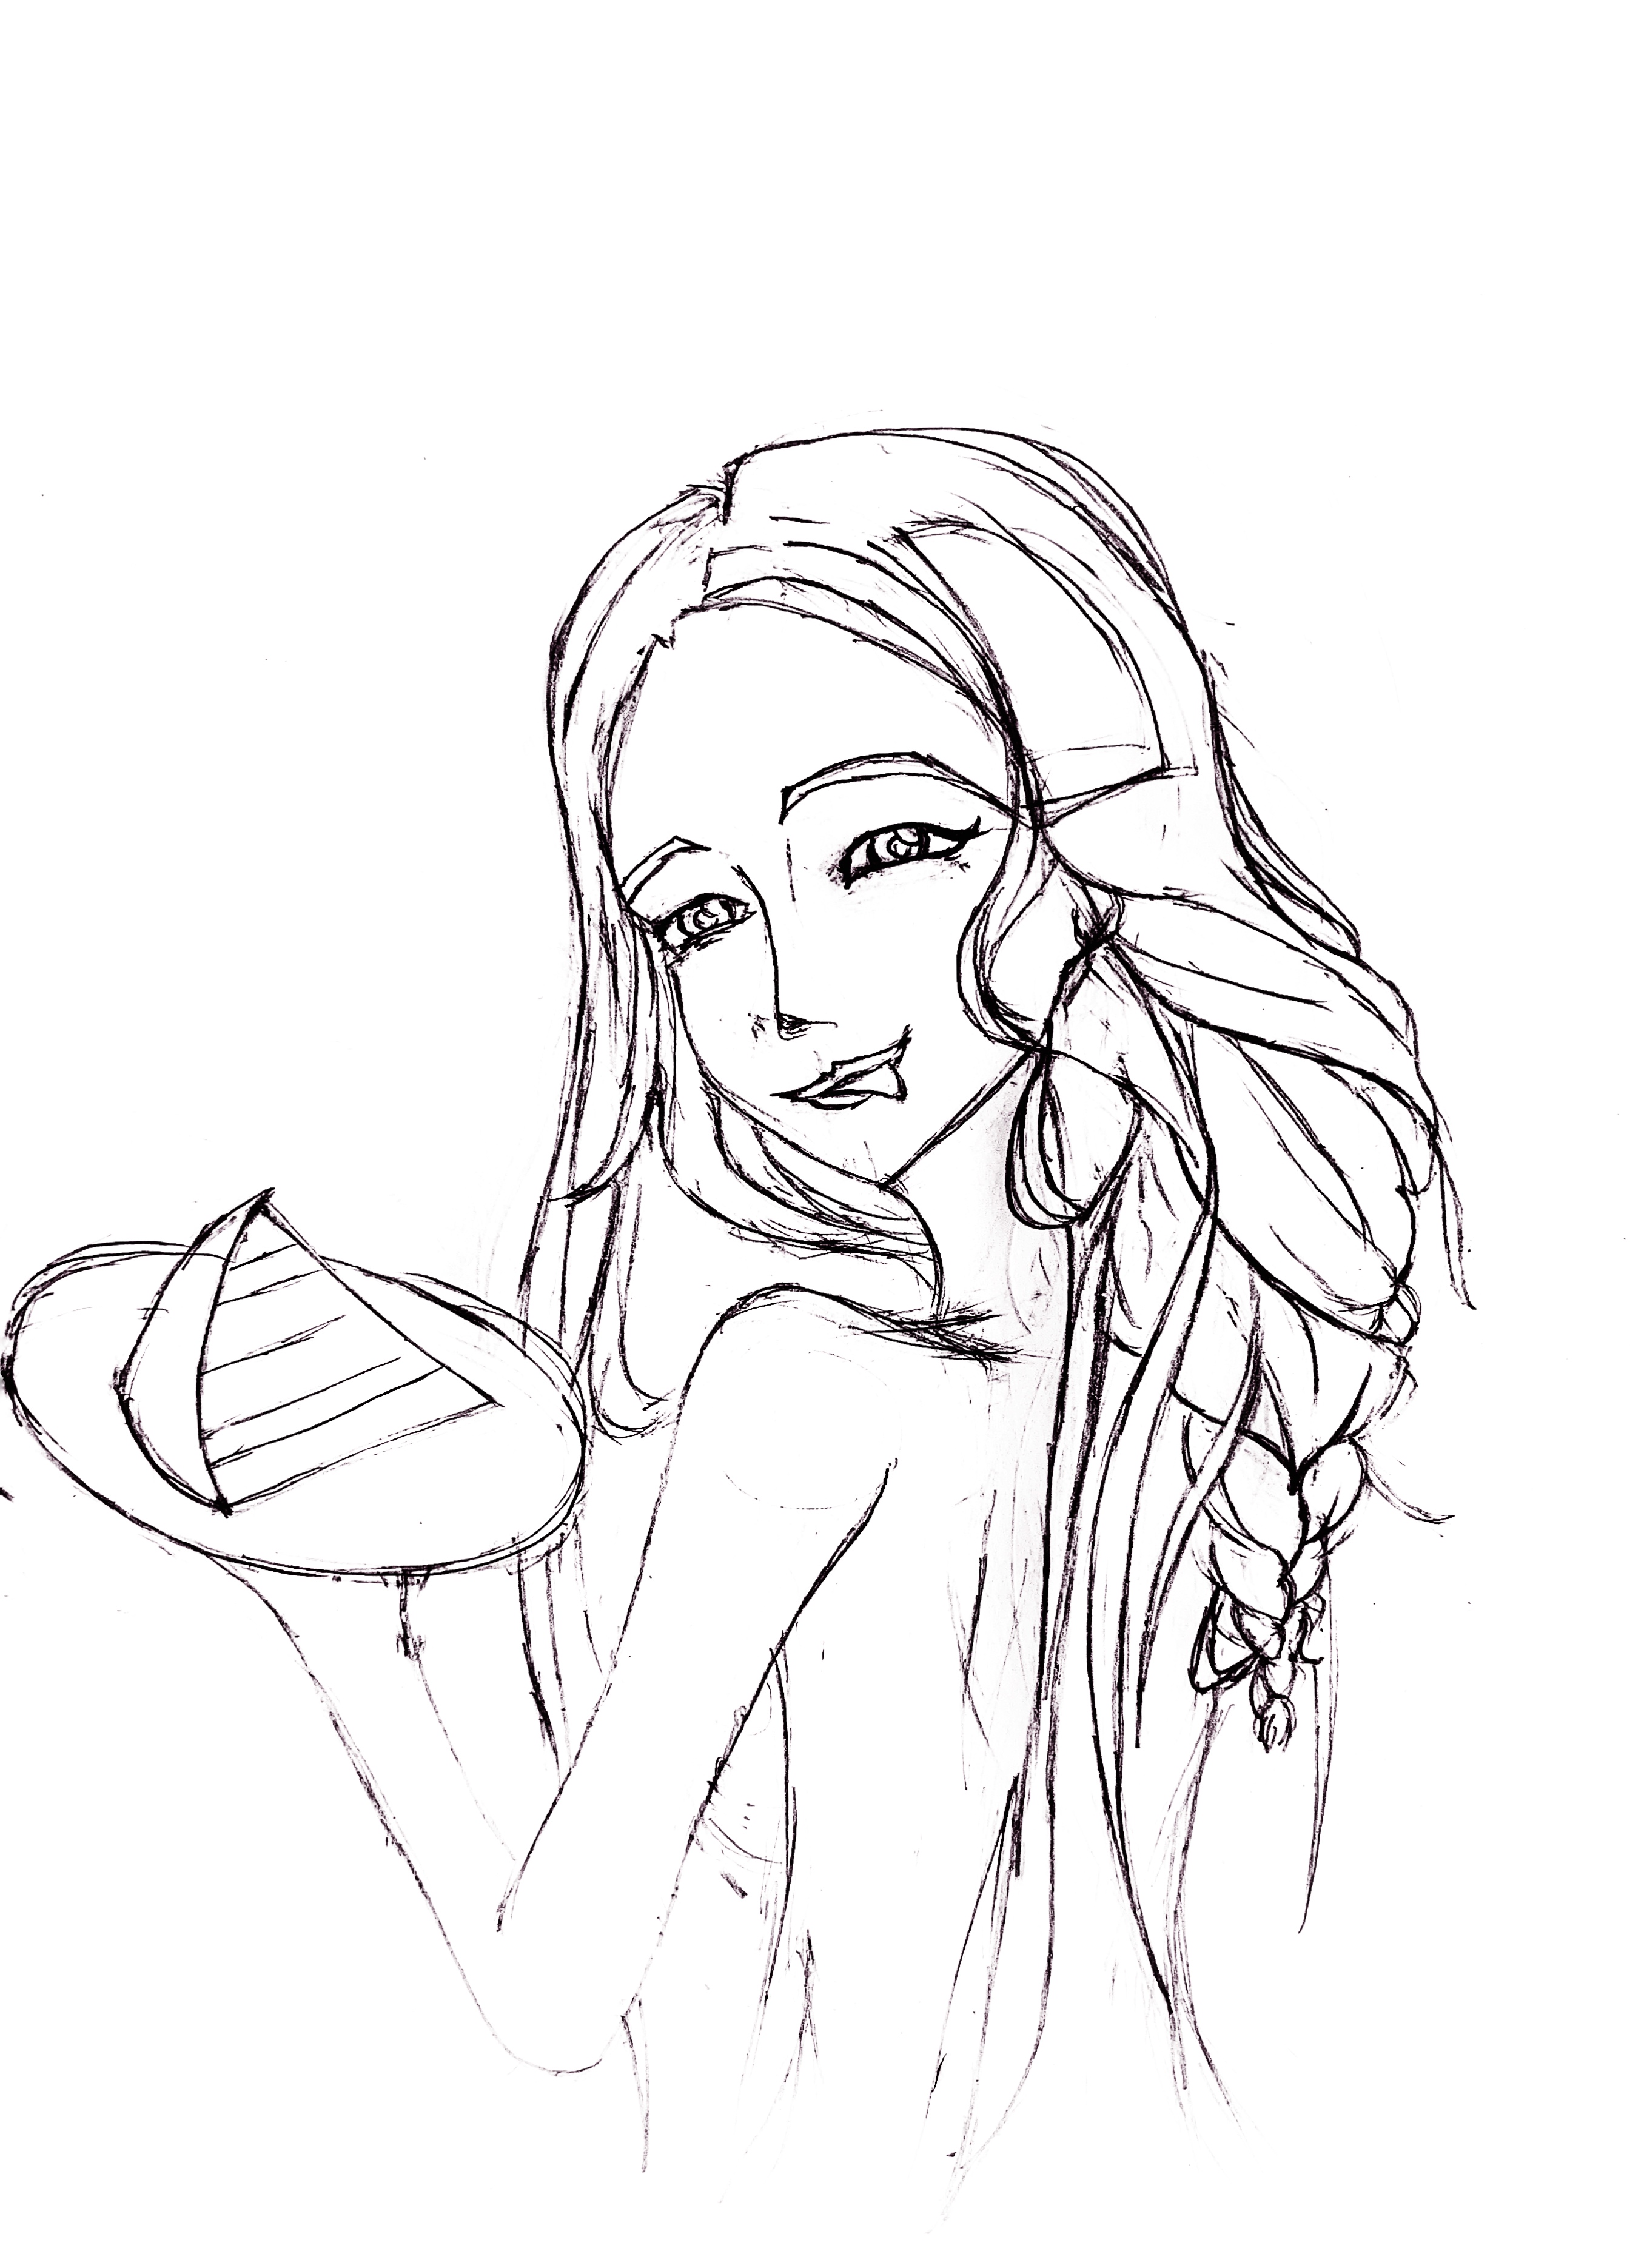 Metafatanoy-character from novel The Delicious Phytoanthrope (Sketch)